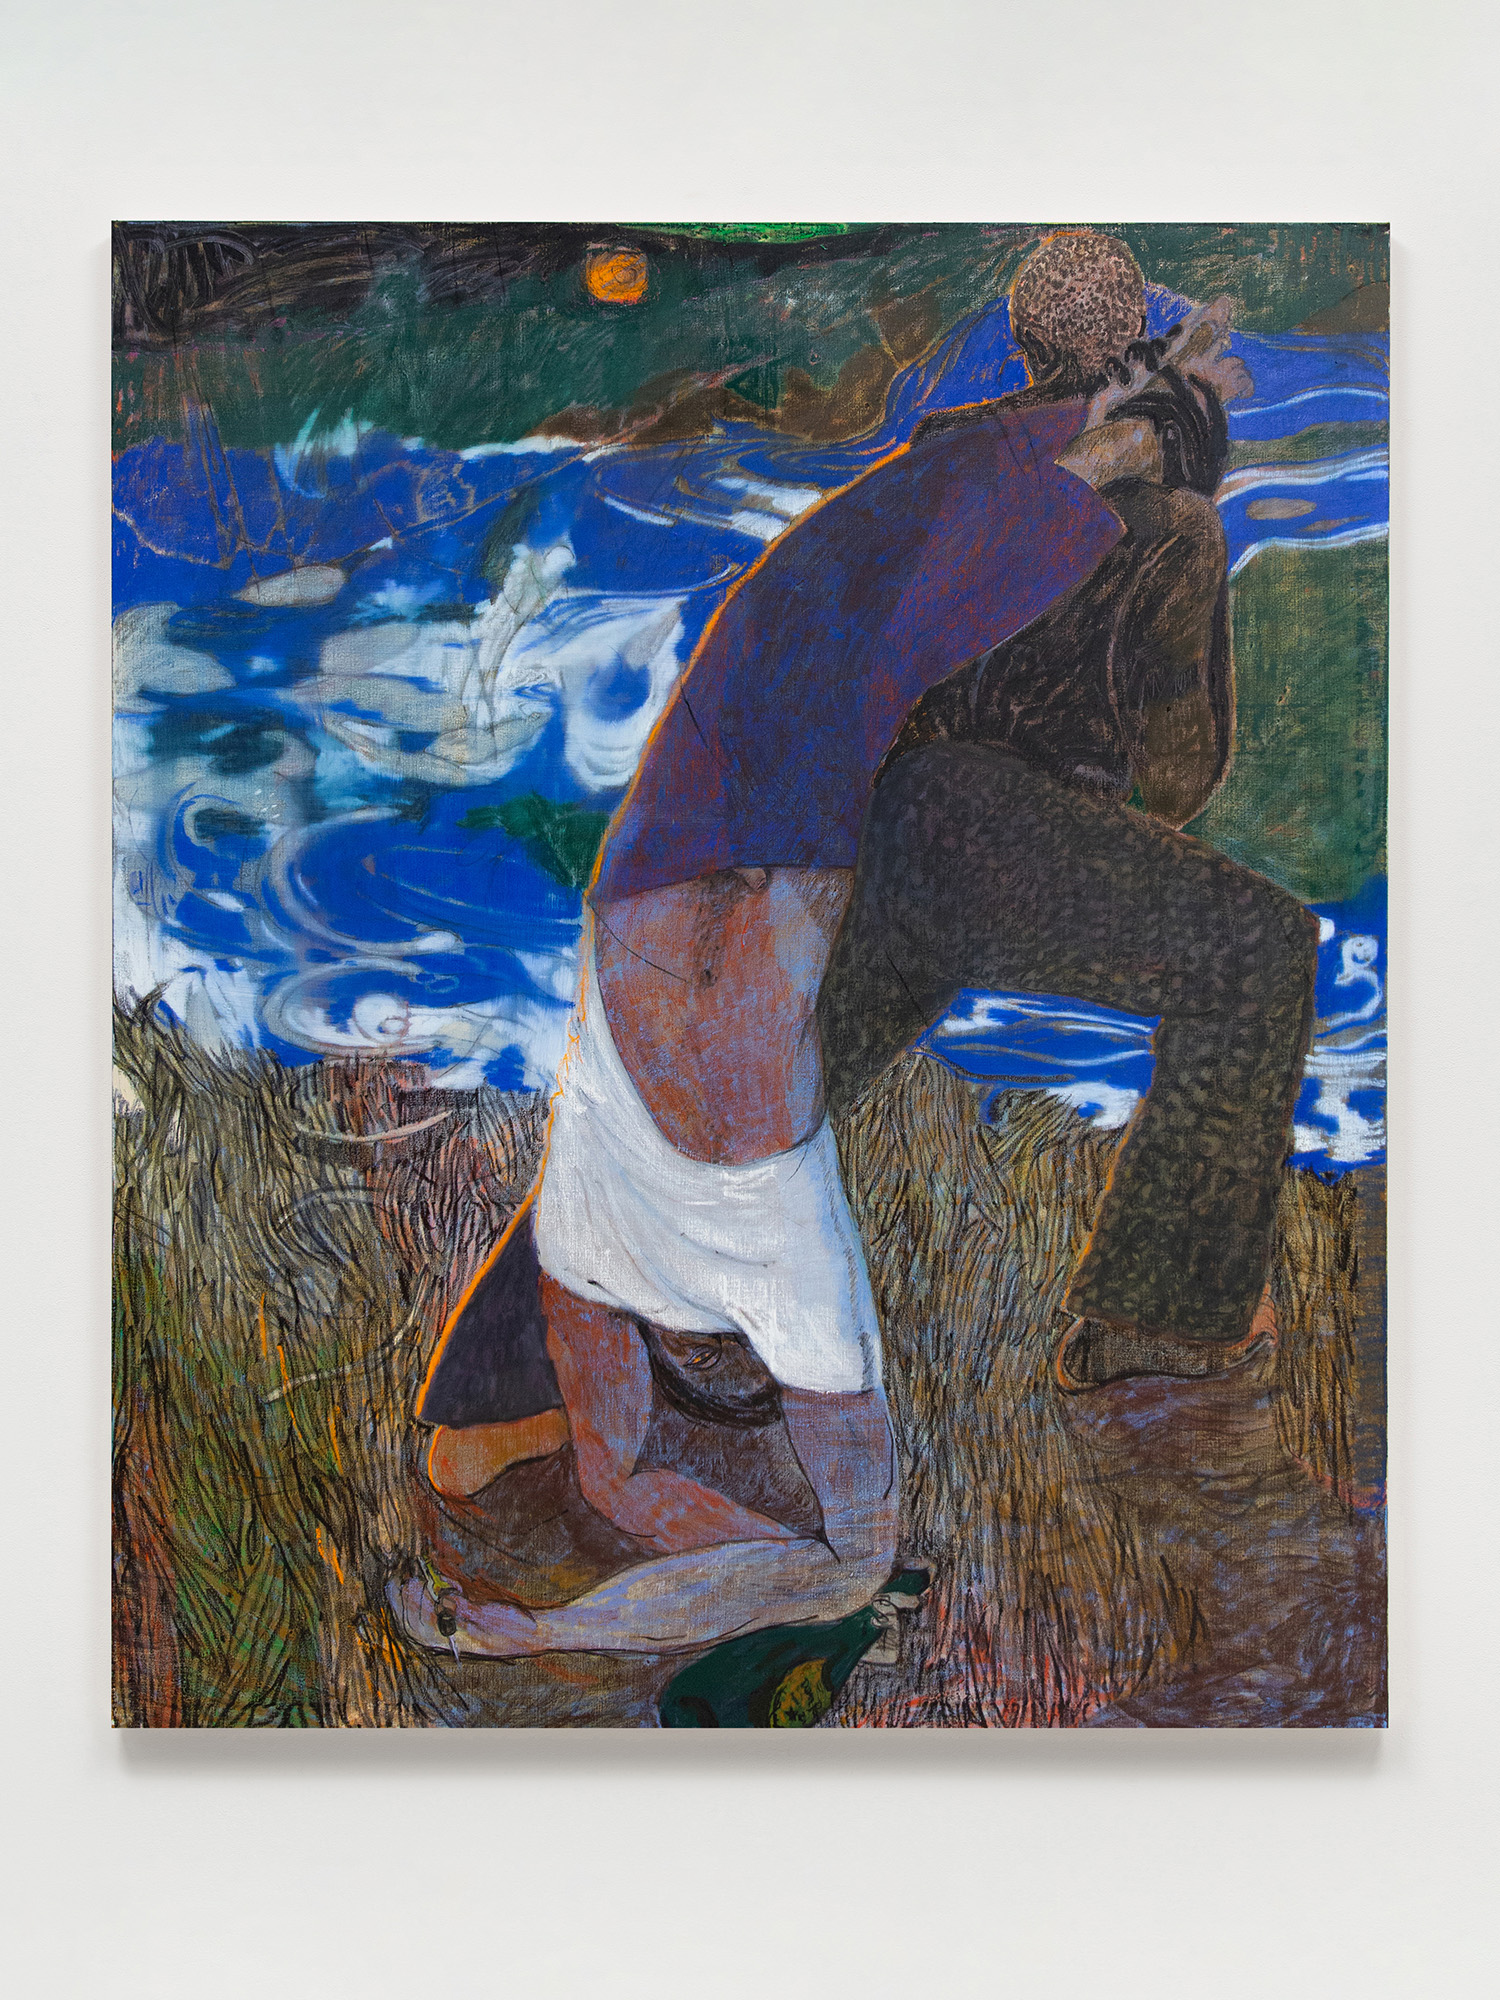 Henry Curchod, Good to those down river, 2022, oil and charcoal on linen, 198.5 x 167.5 cm, 78 1/8 x 66 in.